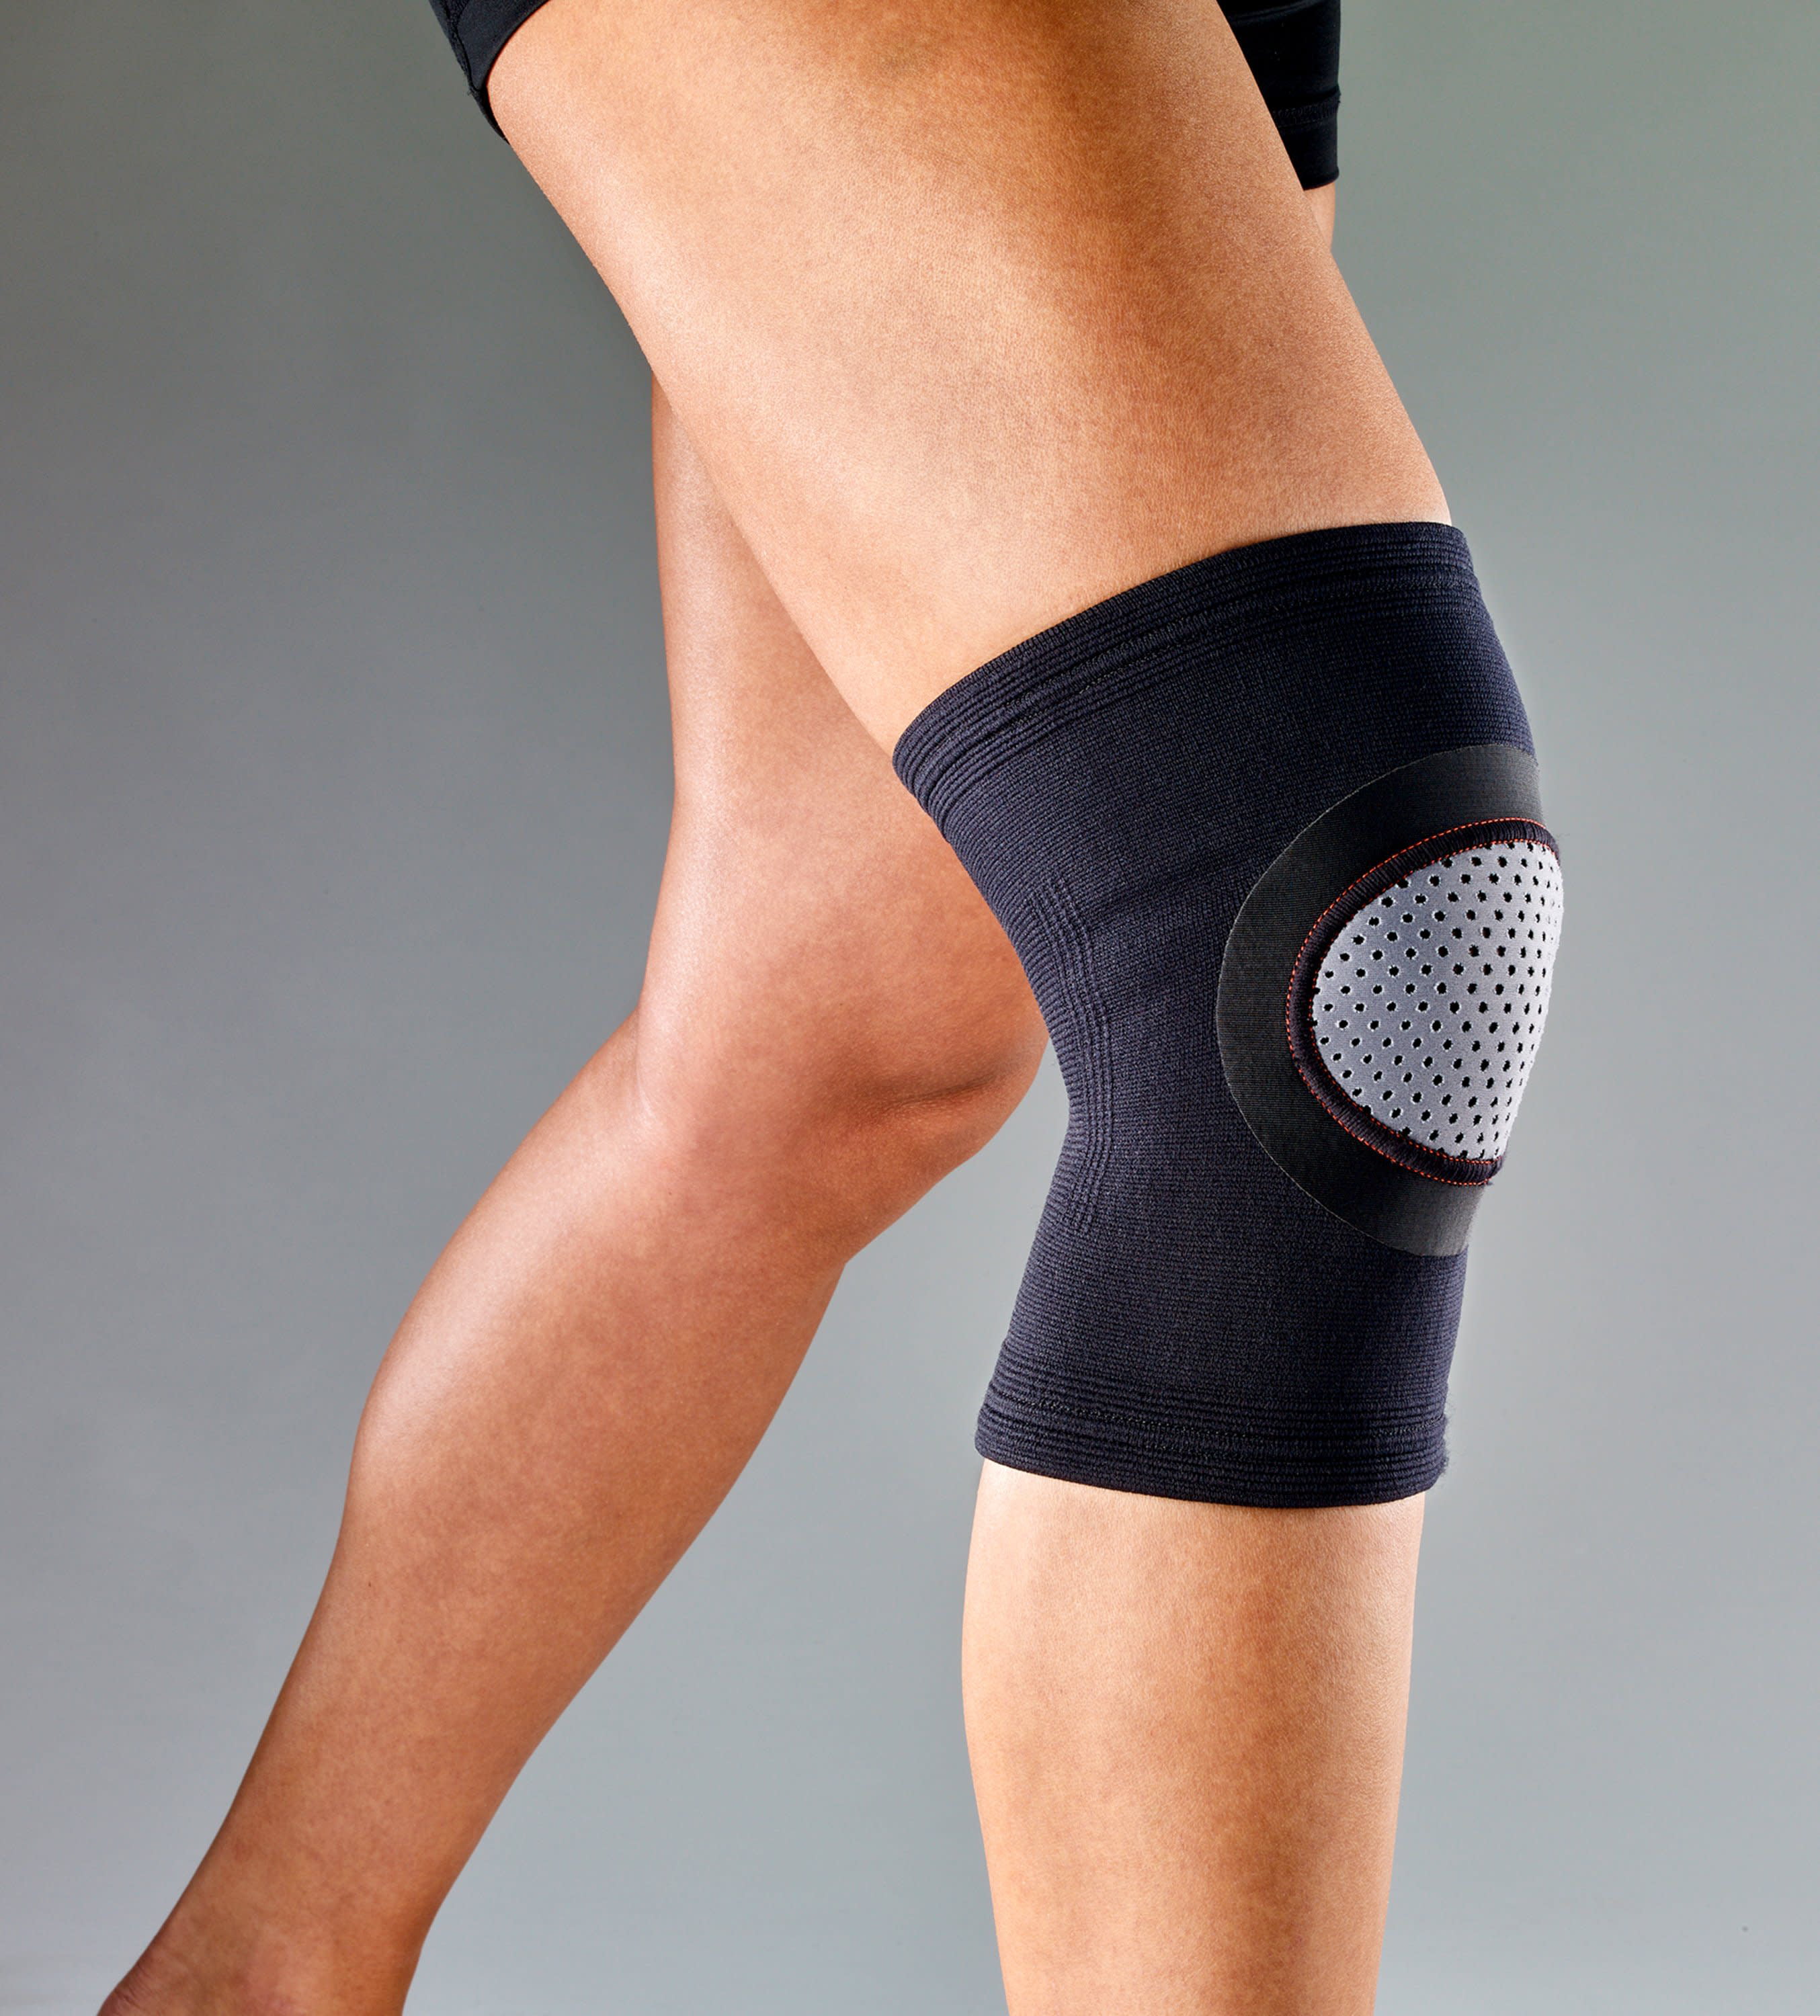 ACE Brand Compression Knee Support, Small/Medium, Black 